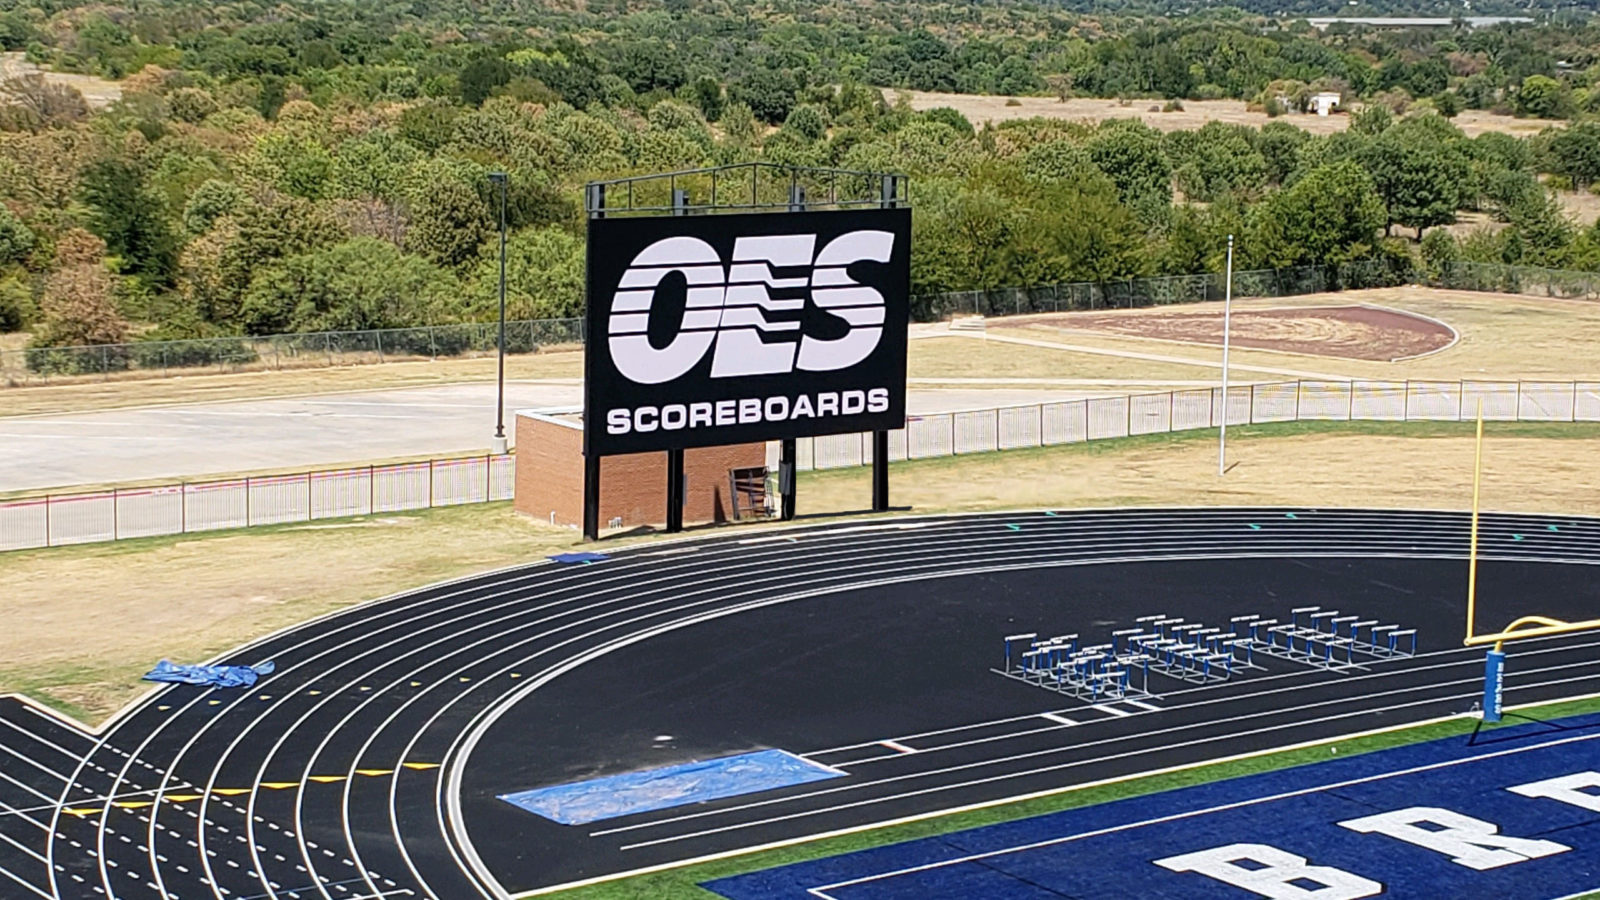 The OES scoreboard logo displayed on a new scoreboard next to an outdoor track.